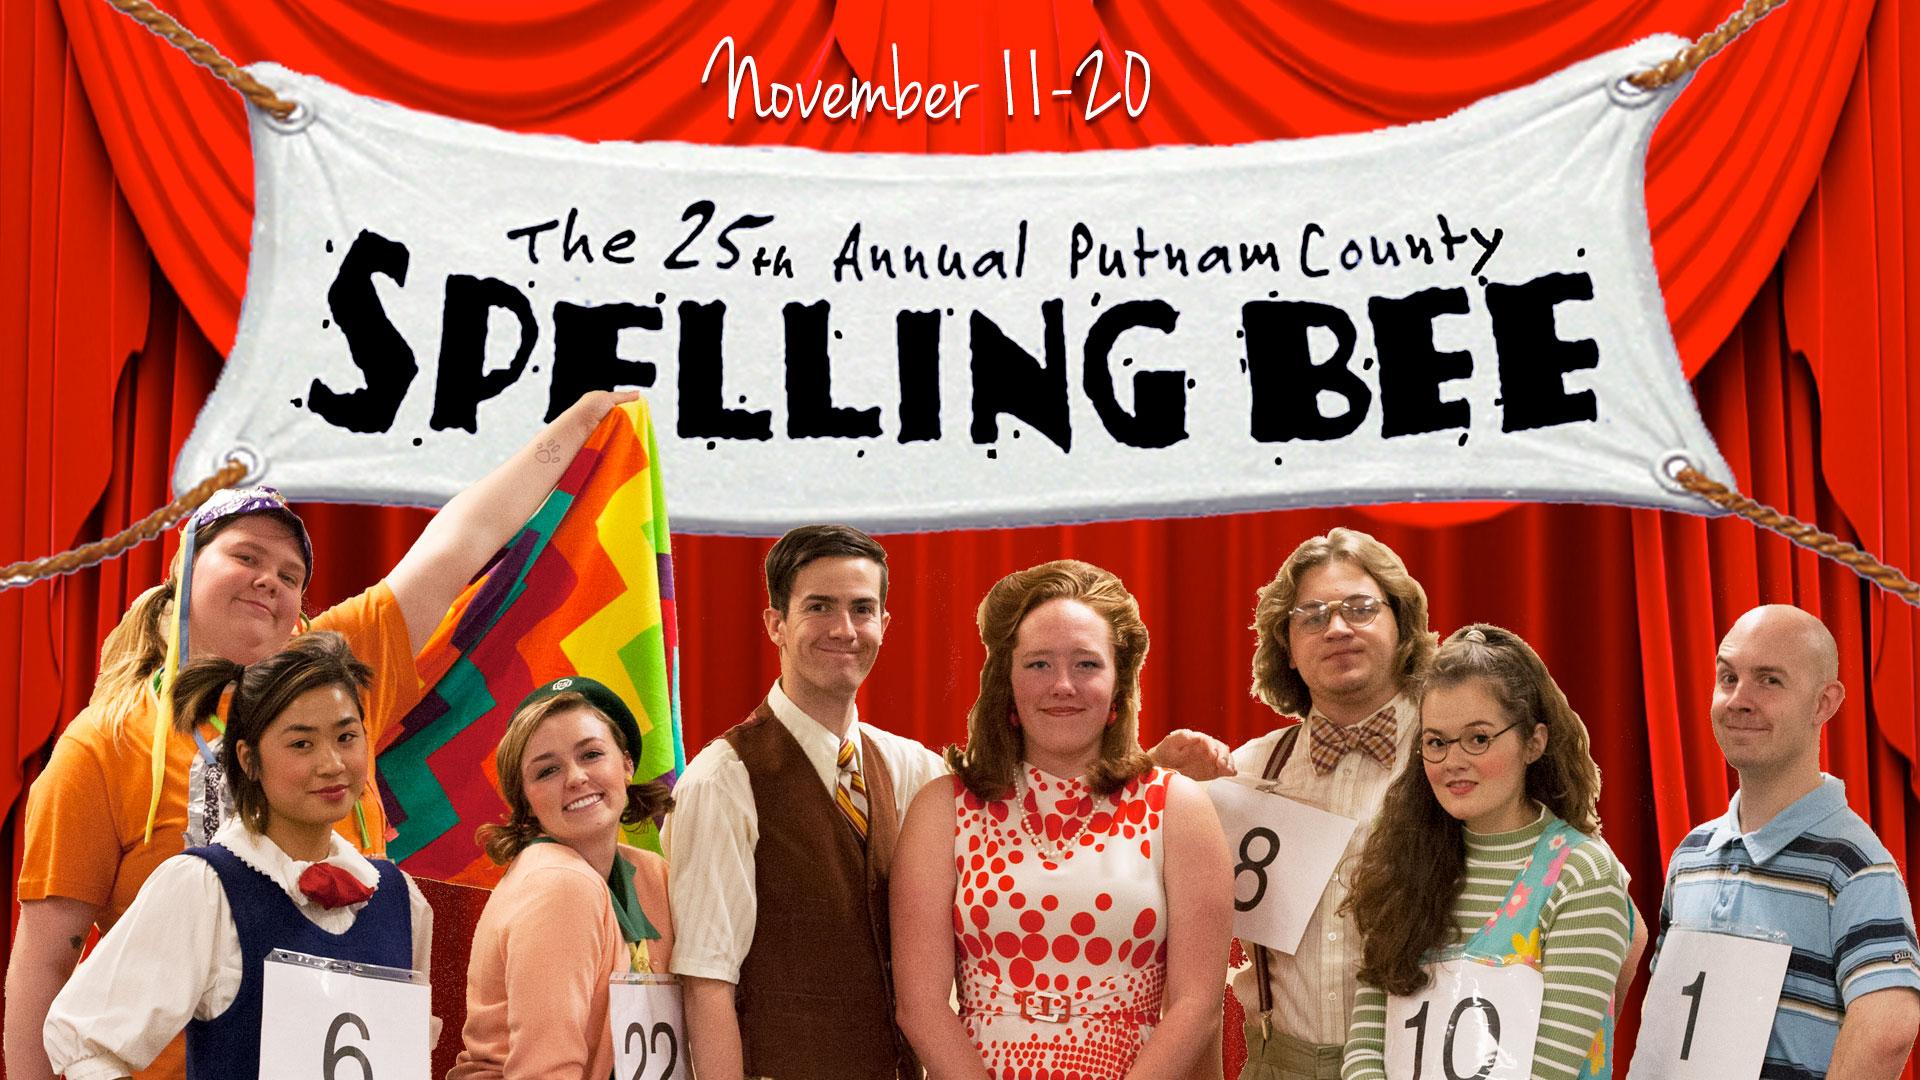 Graphic Featuring the Cast of The 25th Annual Putnam County Spelling Bee